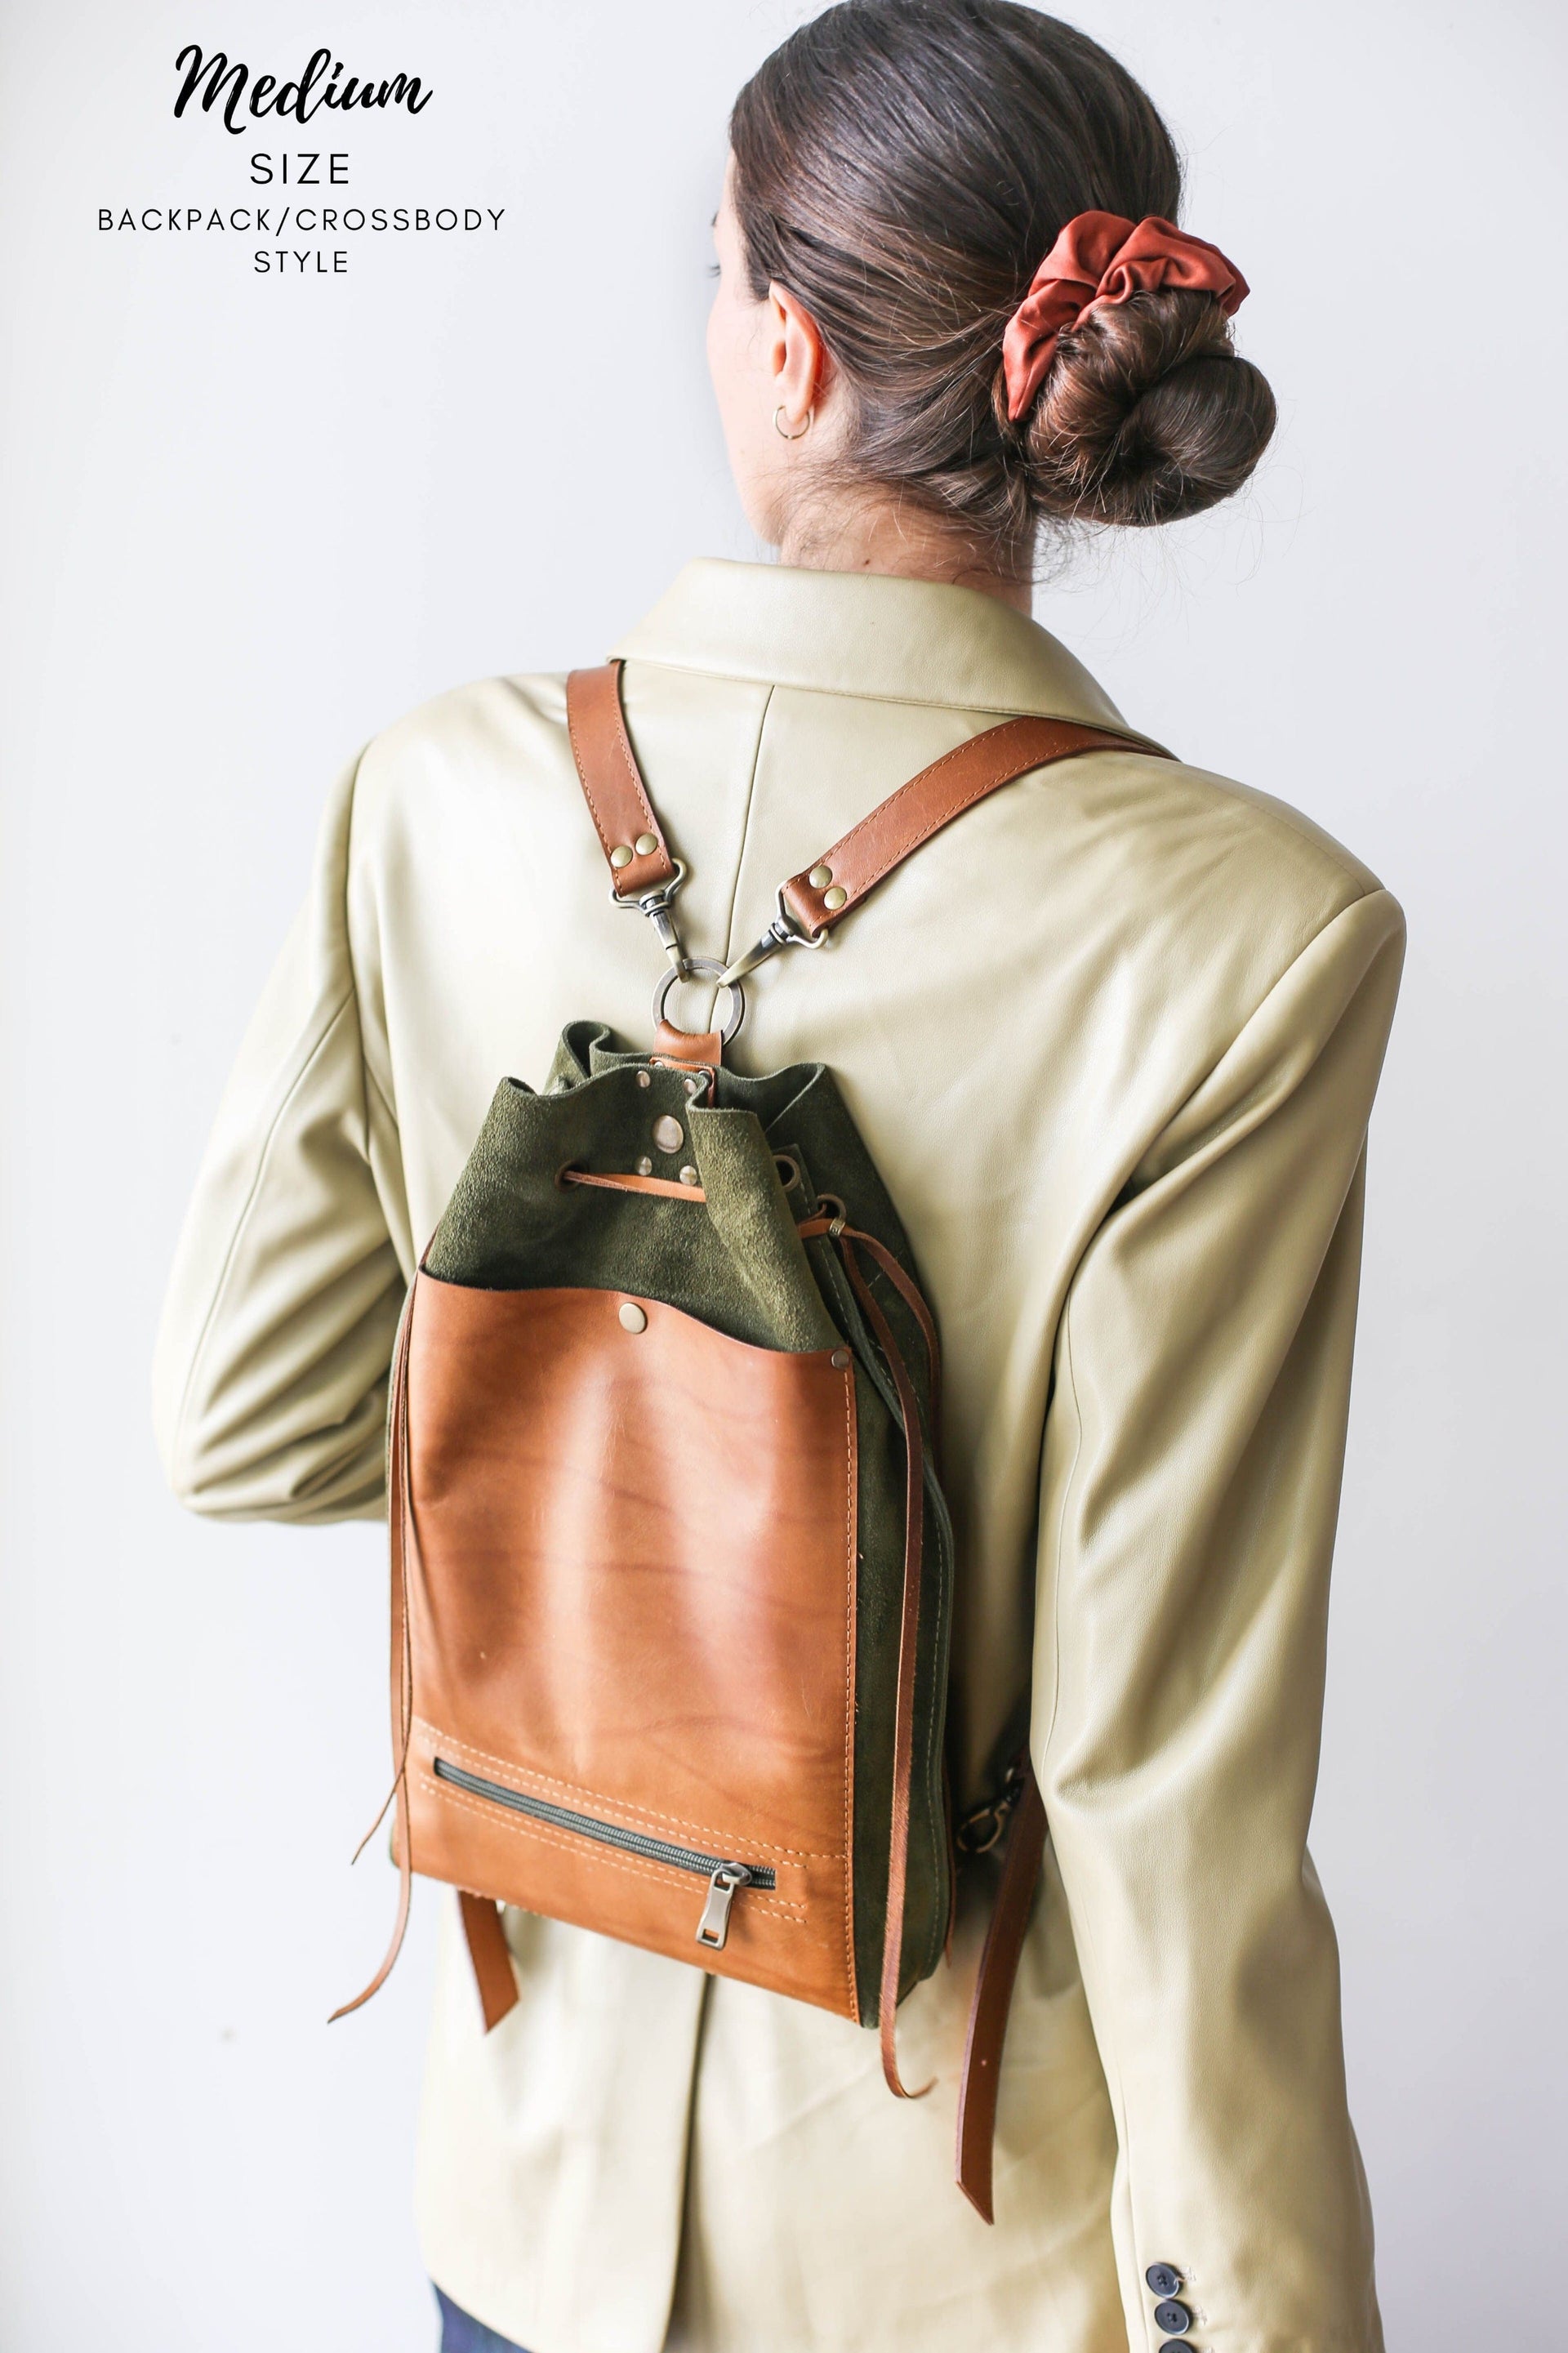 Suede-Trimmed Full-Grain Leather Backpack